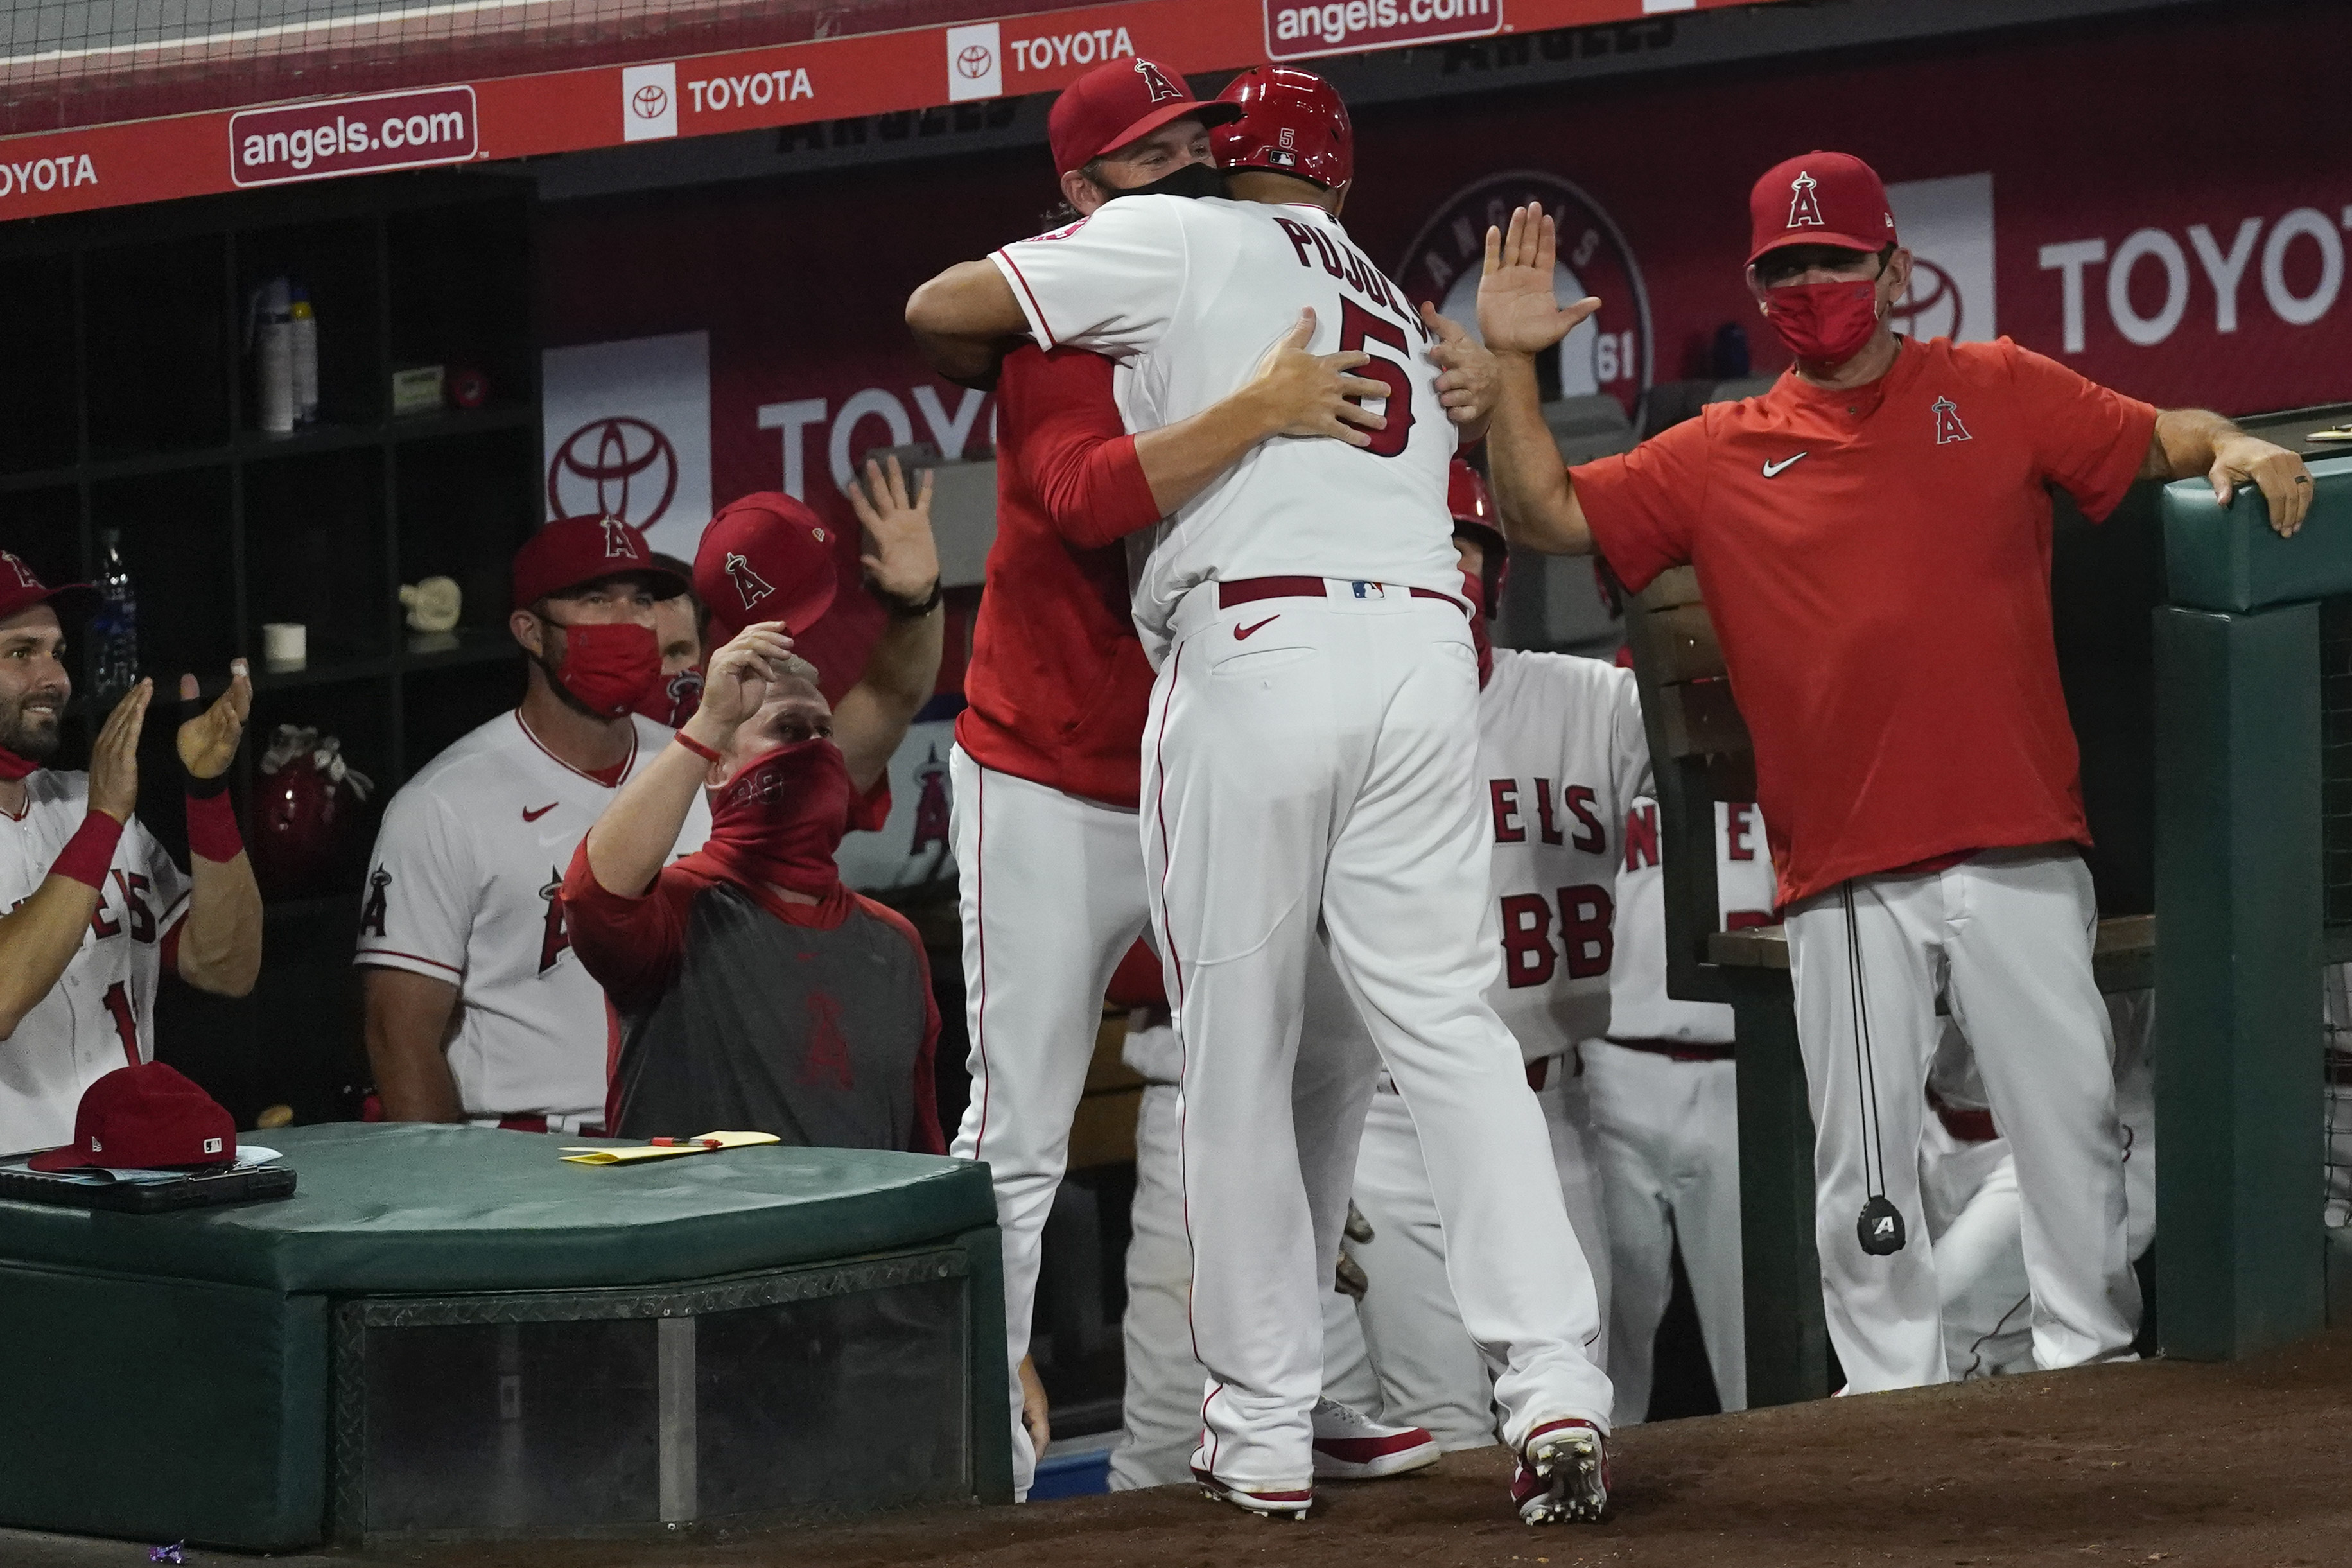 Albert Pujols hits 661 career home run to pass Willie Mays for 5th